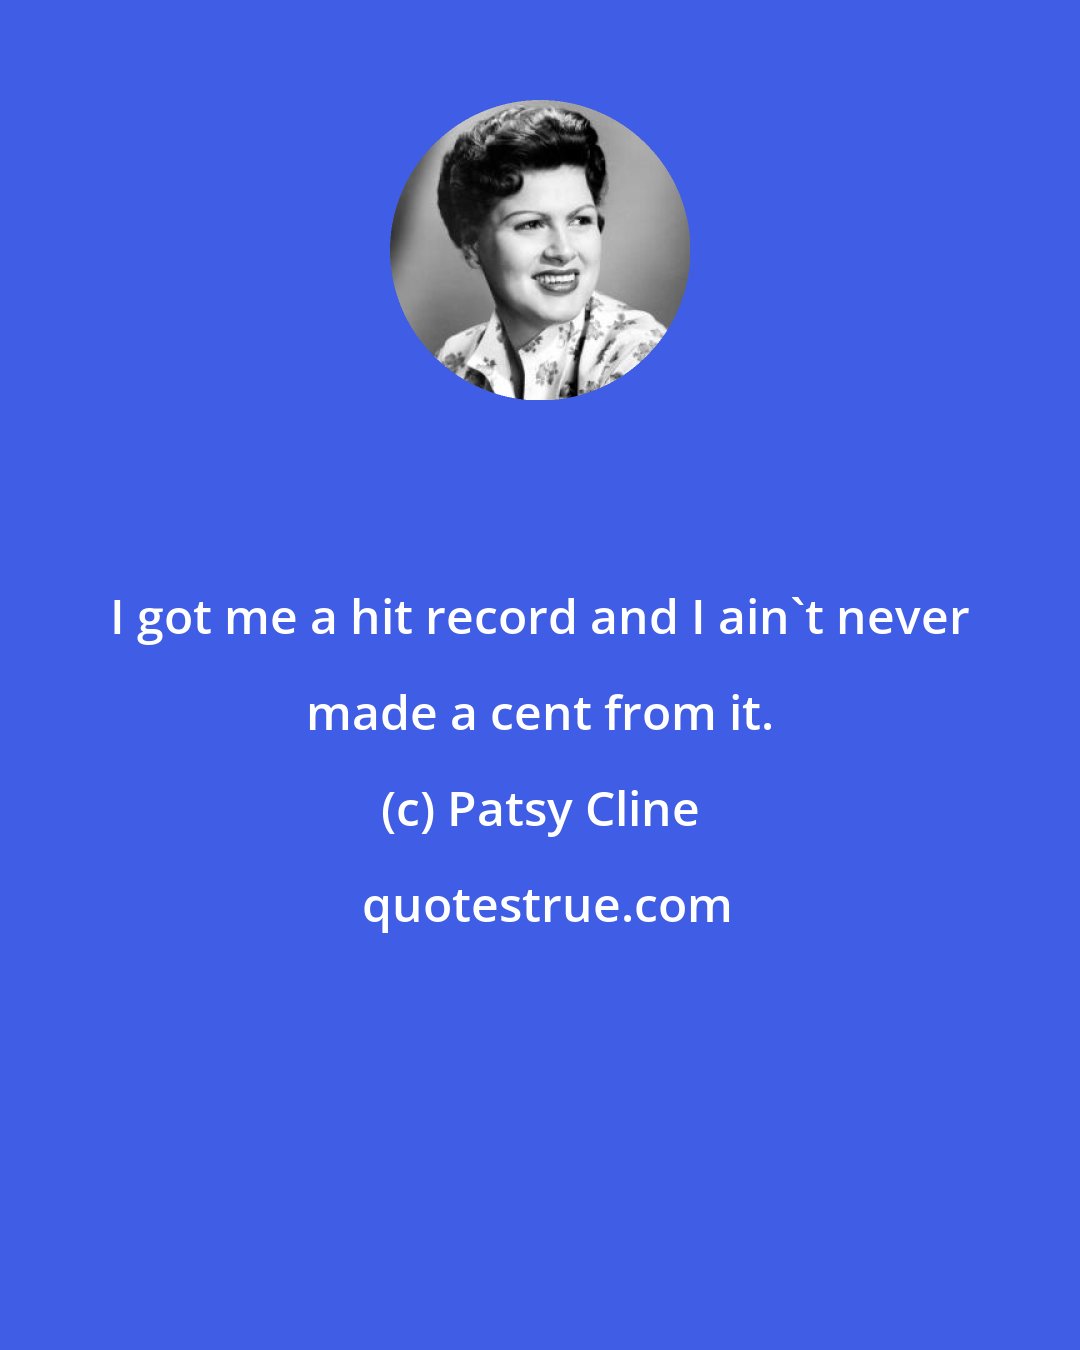 Patsy Cline: I got me a hit record and I ain't never made a cent from it.